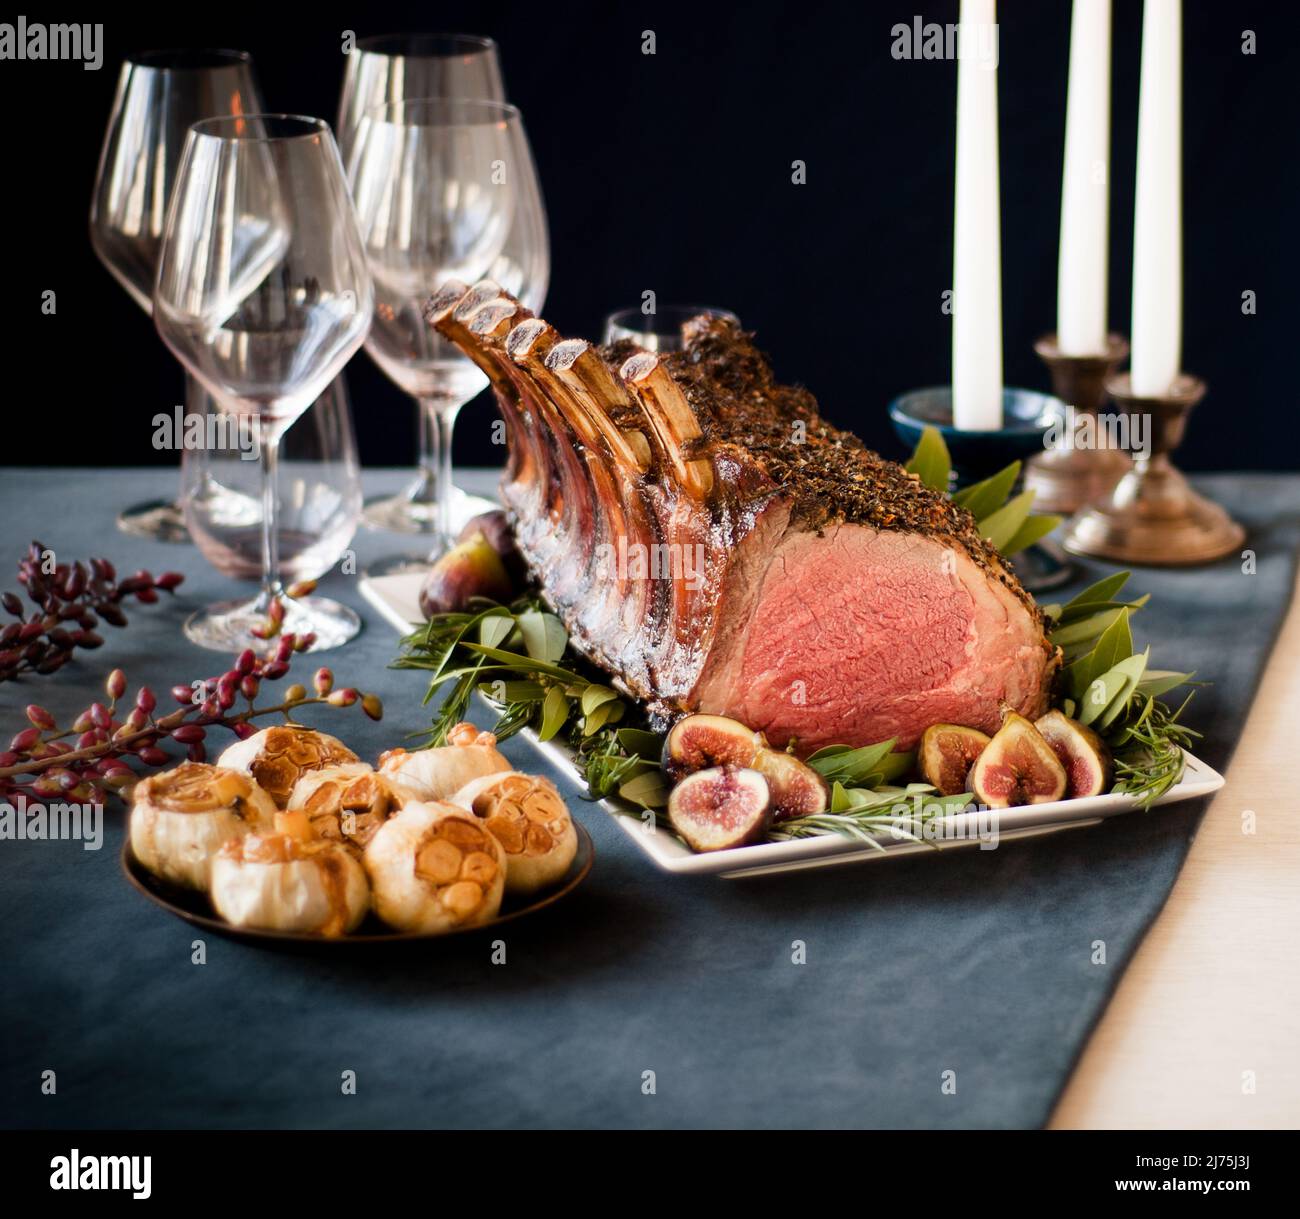 Aged Frenched prime rib roast with garlic and figs Stock Photo